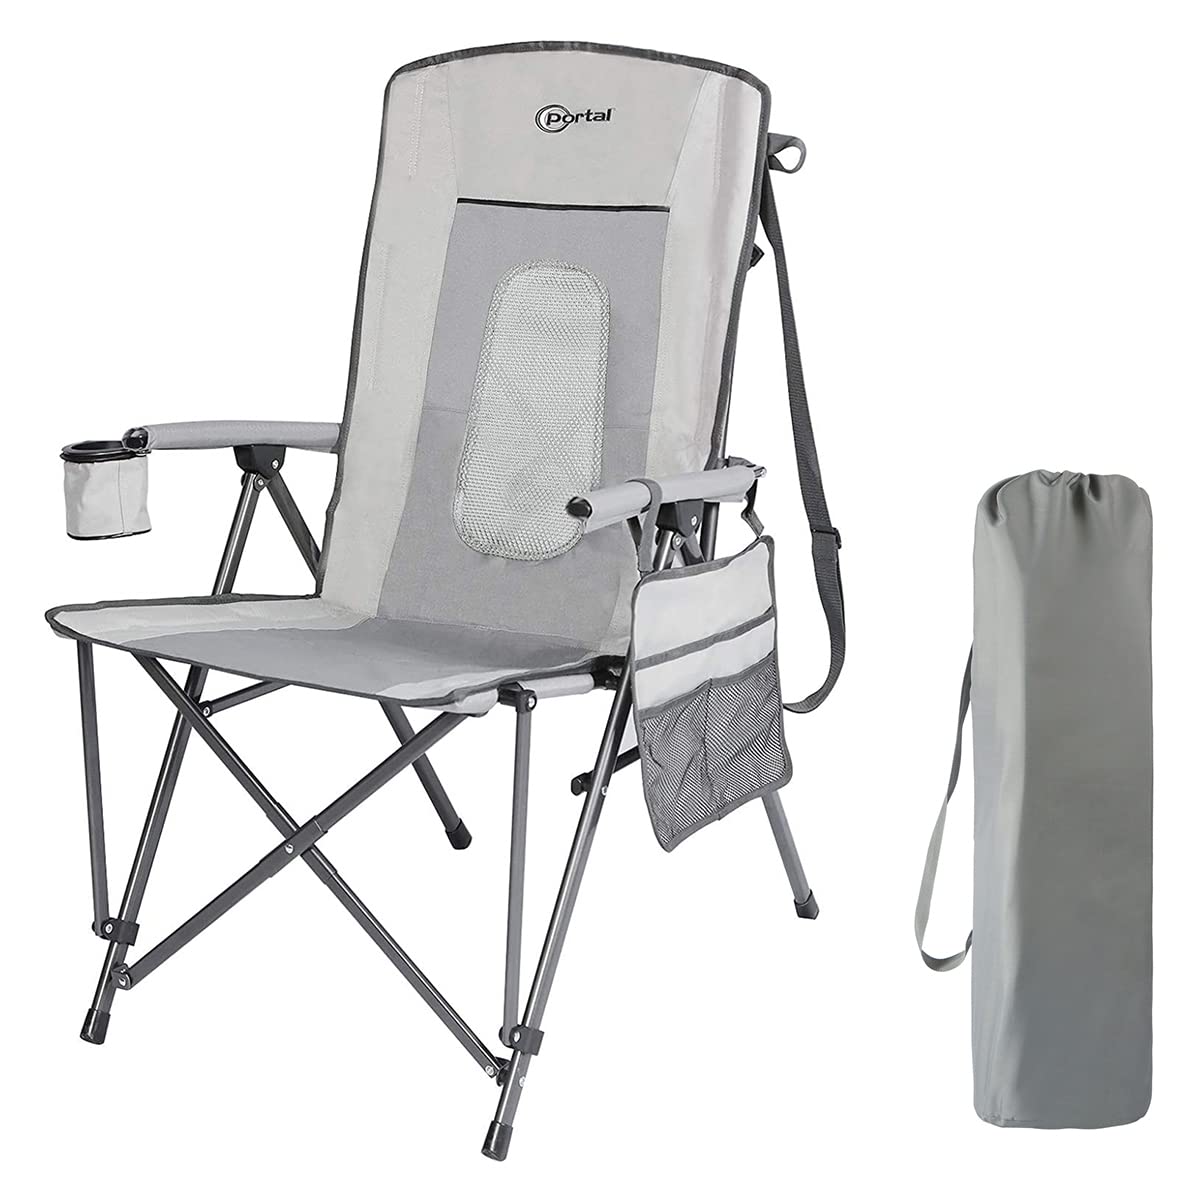 PORTAL Oversized Quad Folding Camping Chair High Back Cup Holder